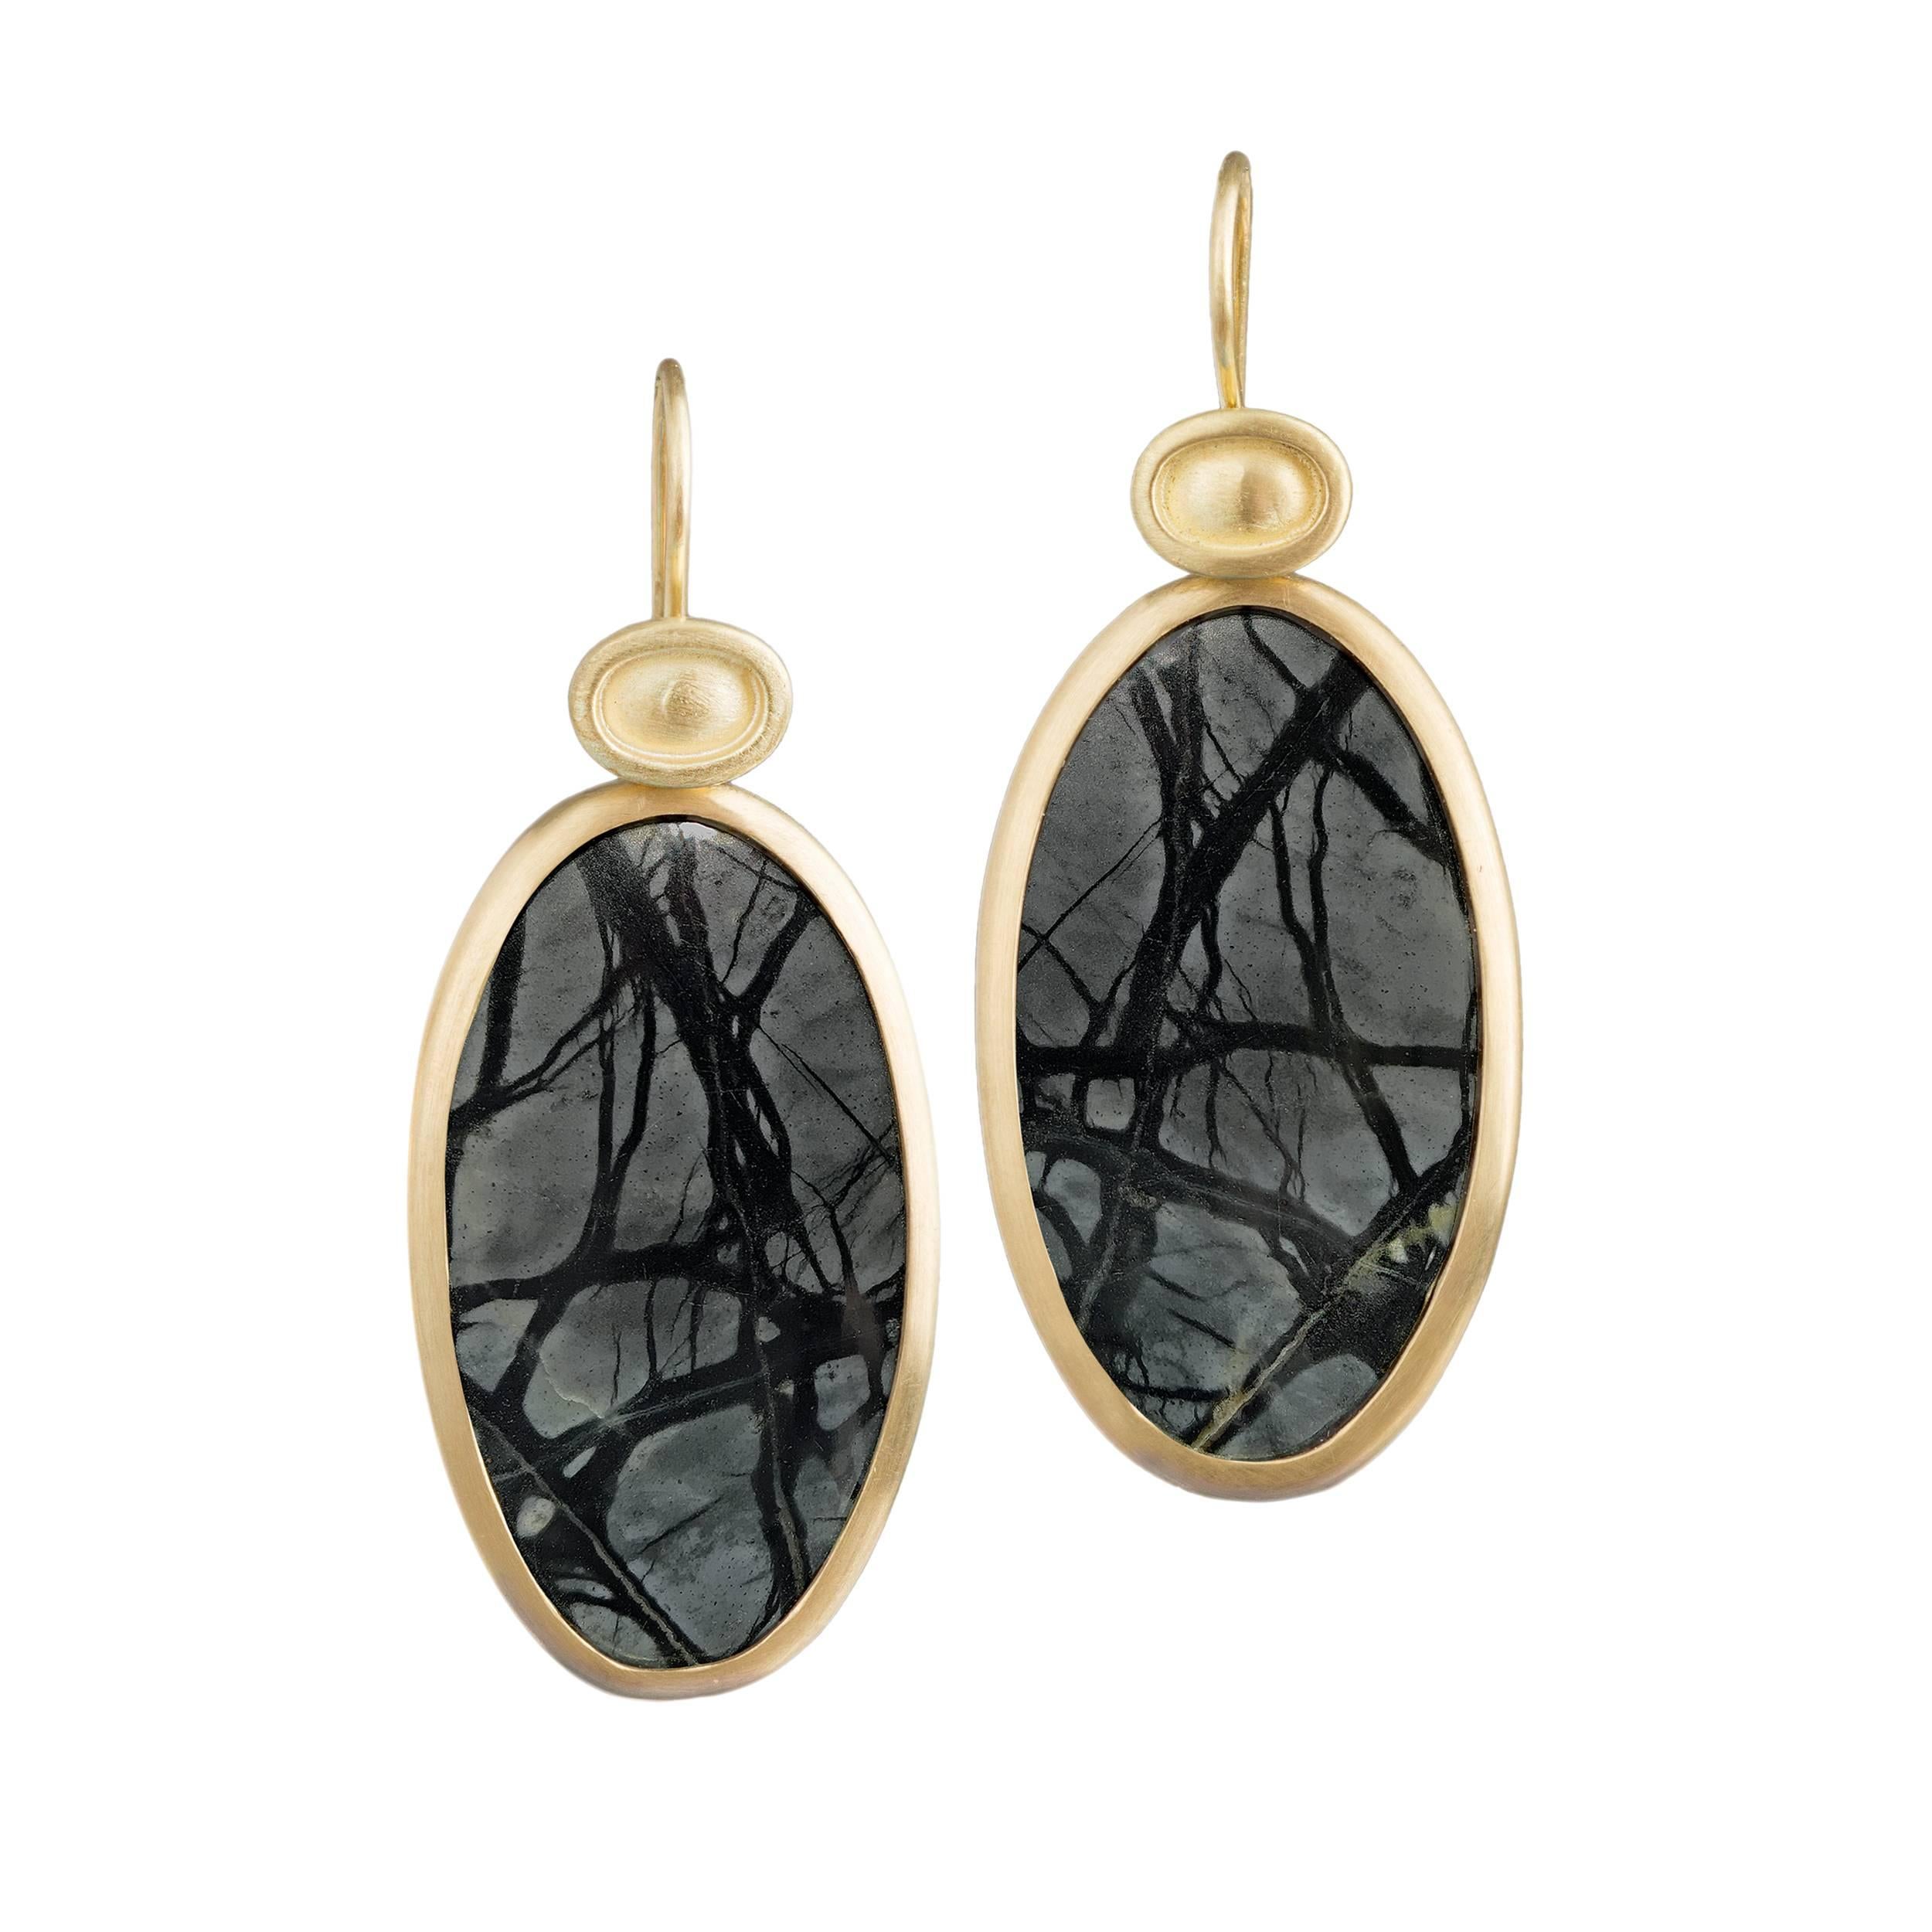 Monica Marcella Matched Steel Gray and Black Natural Jasper Drop Earrings